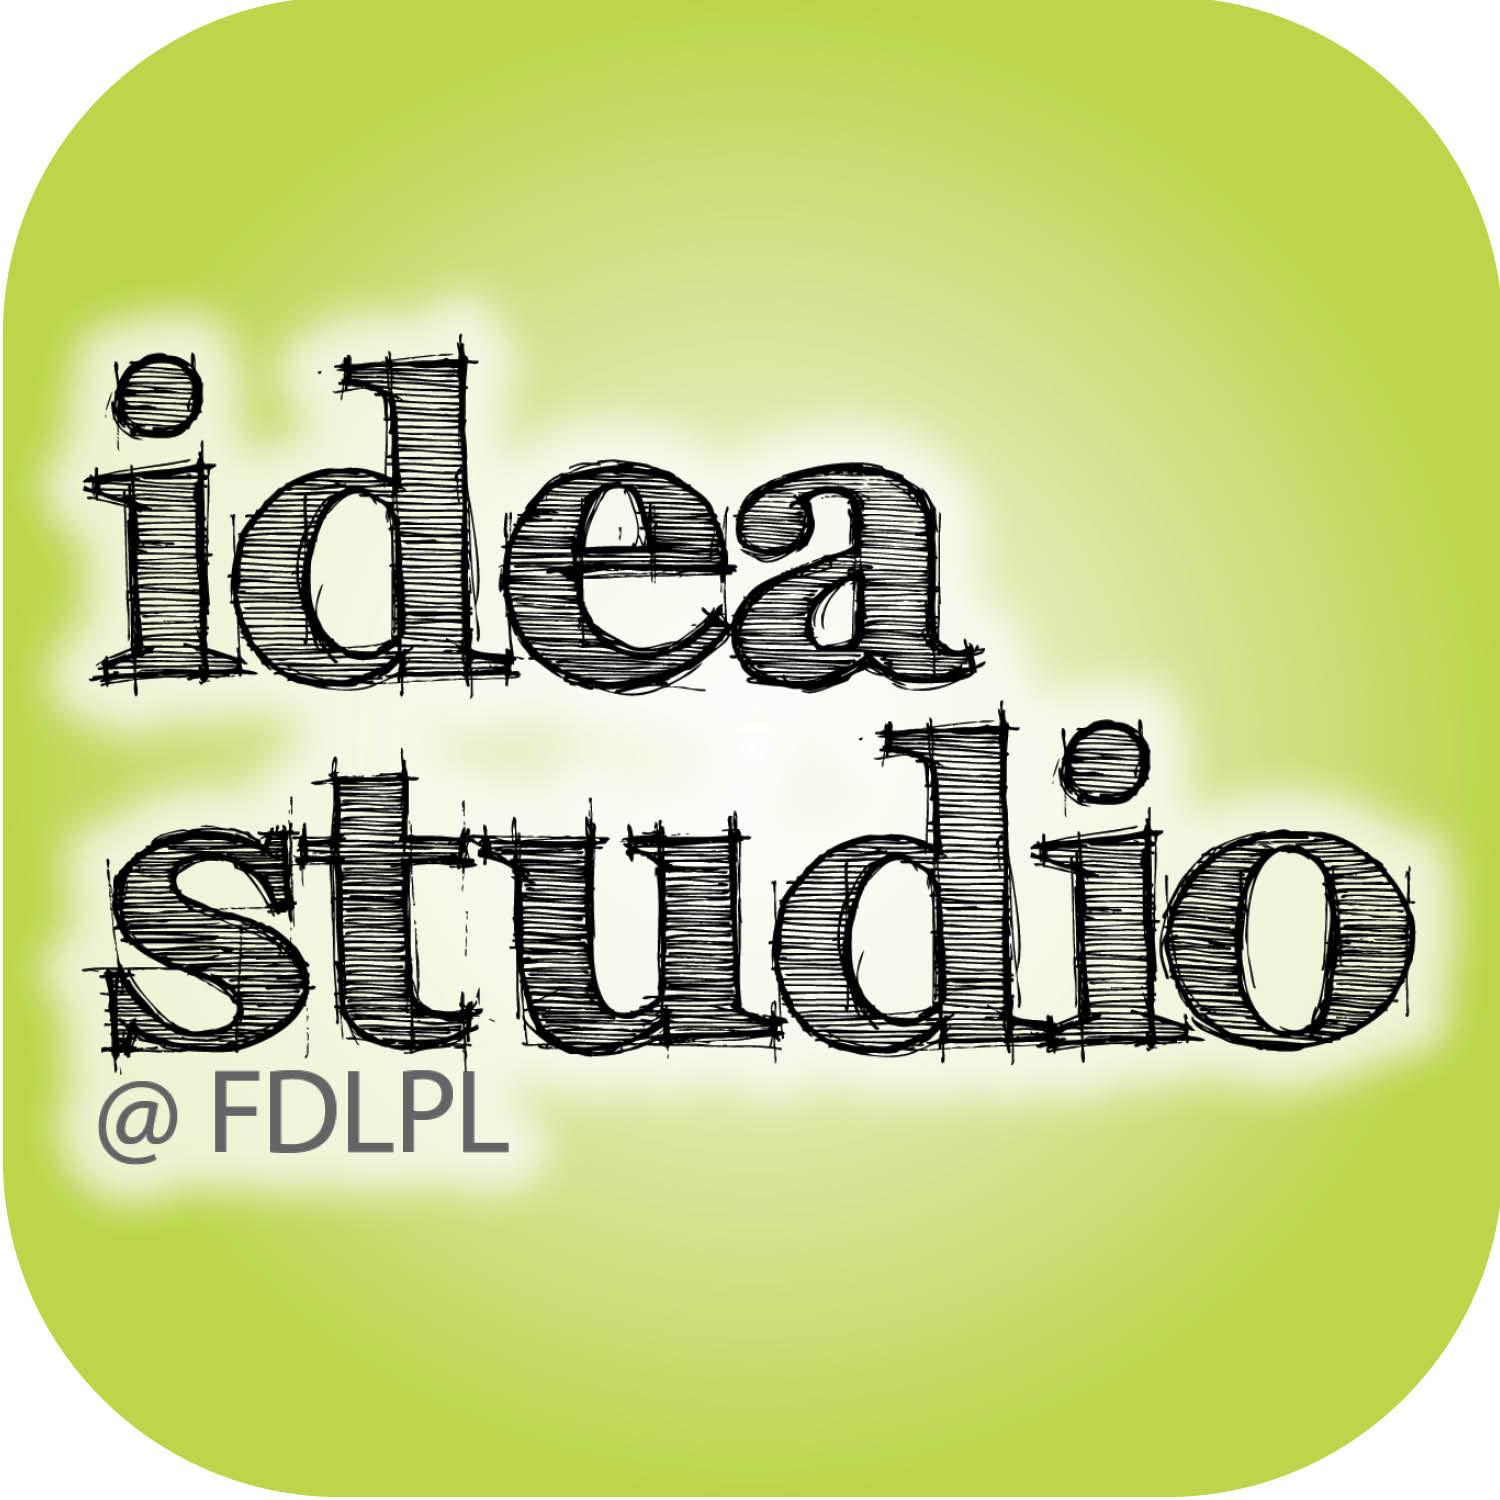 Collages and keychains and more coming to the Idea Studio in September